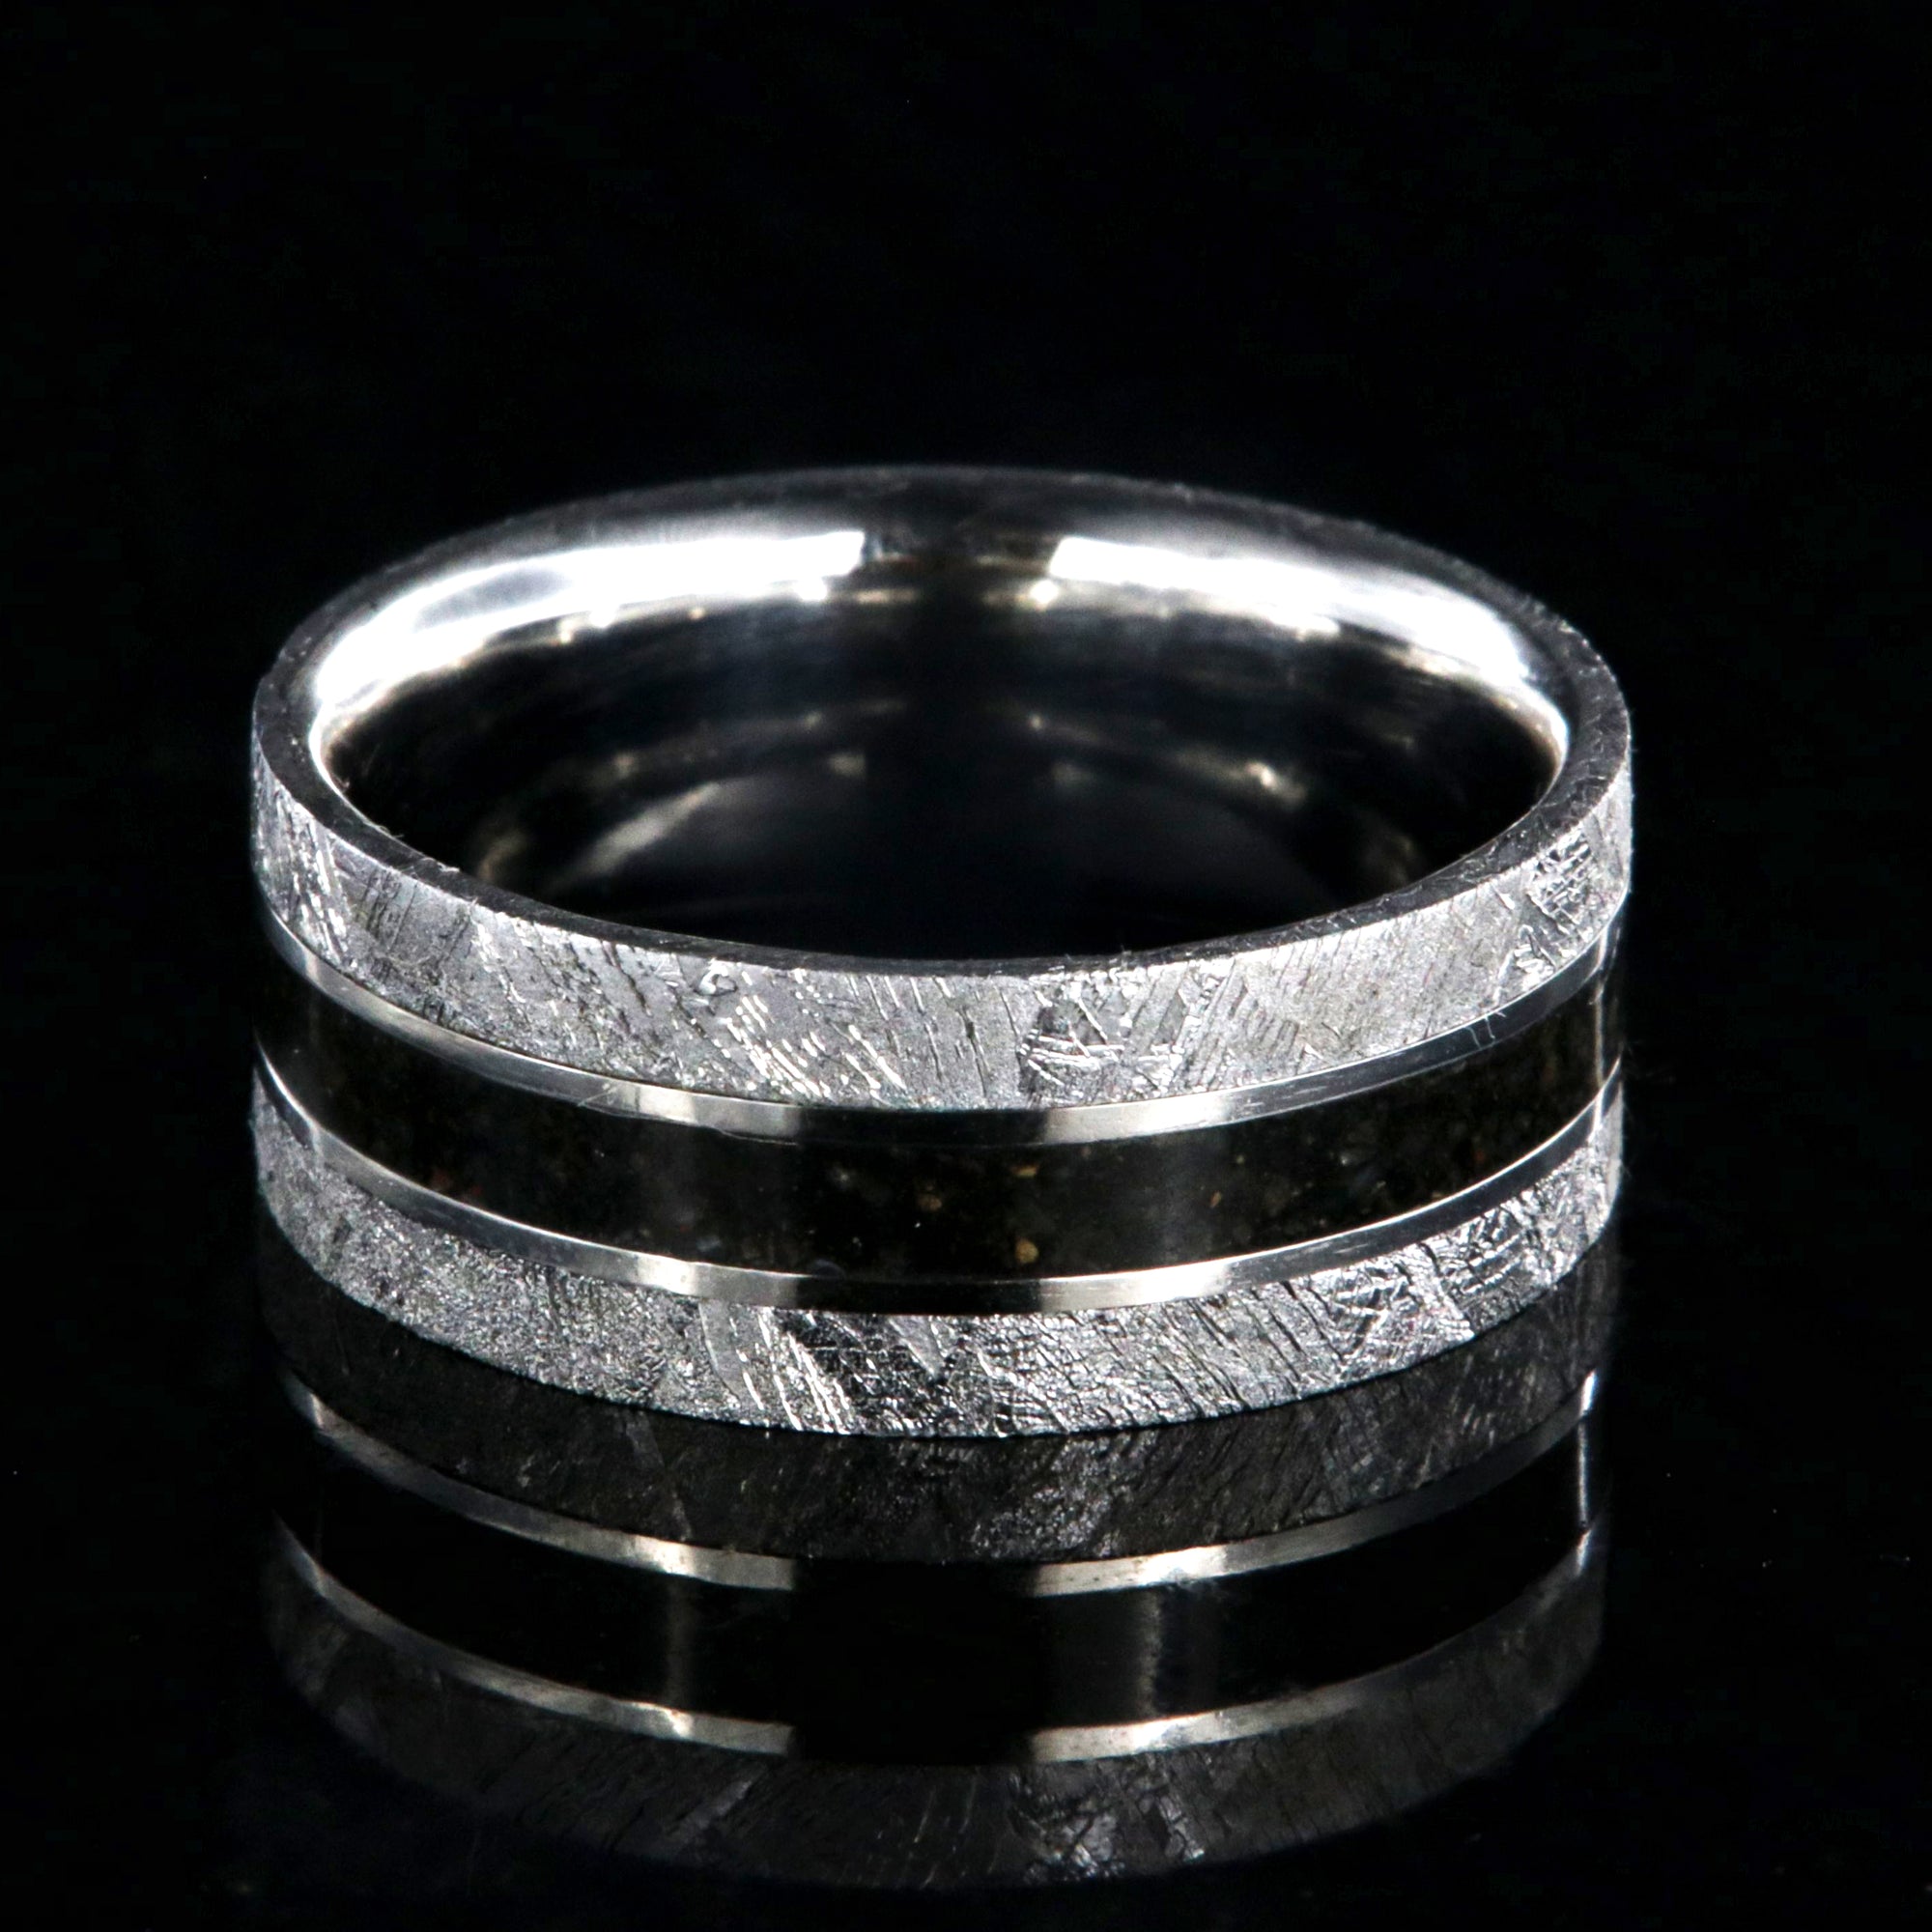 9mm wide men's wedding band with a dark dinosaur bone center inlay, Gibeon meteorite edges, and a flat profile